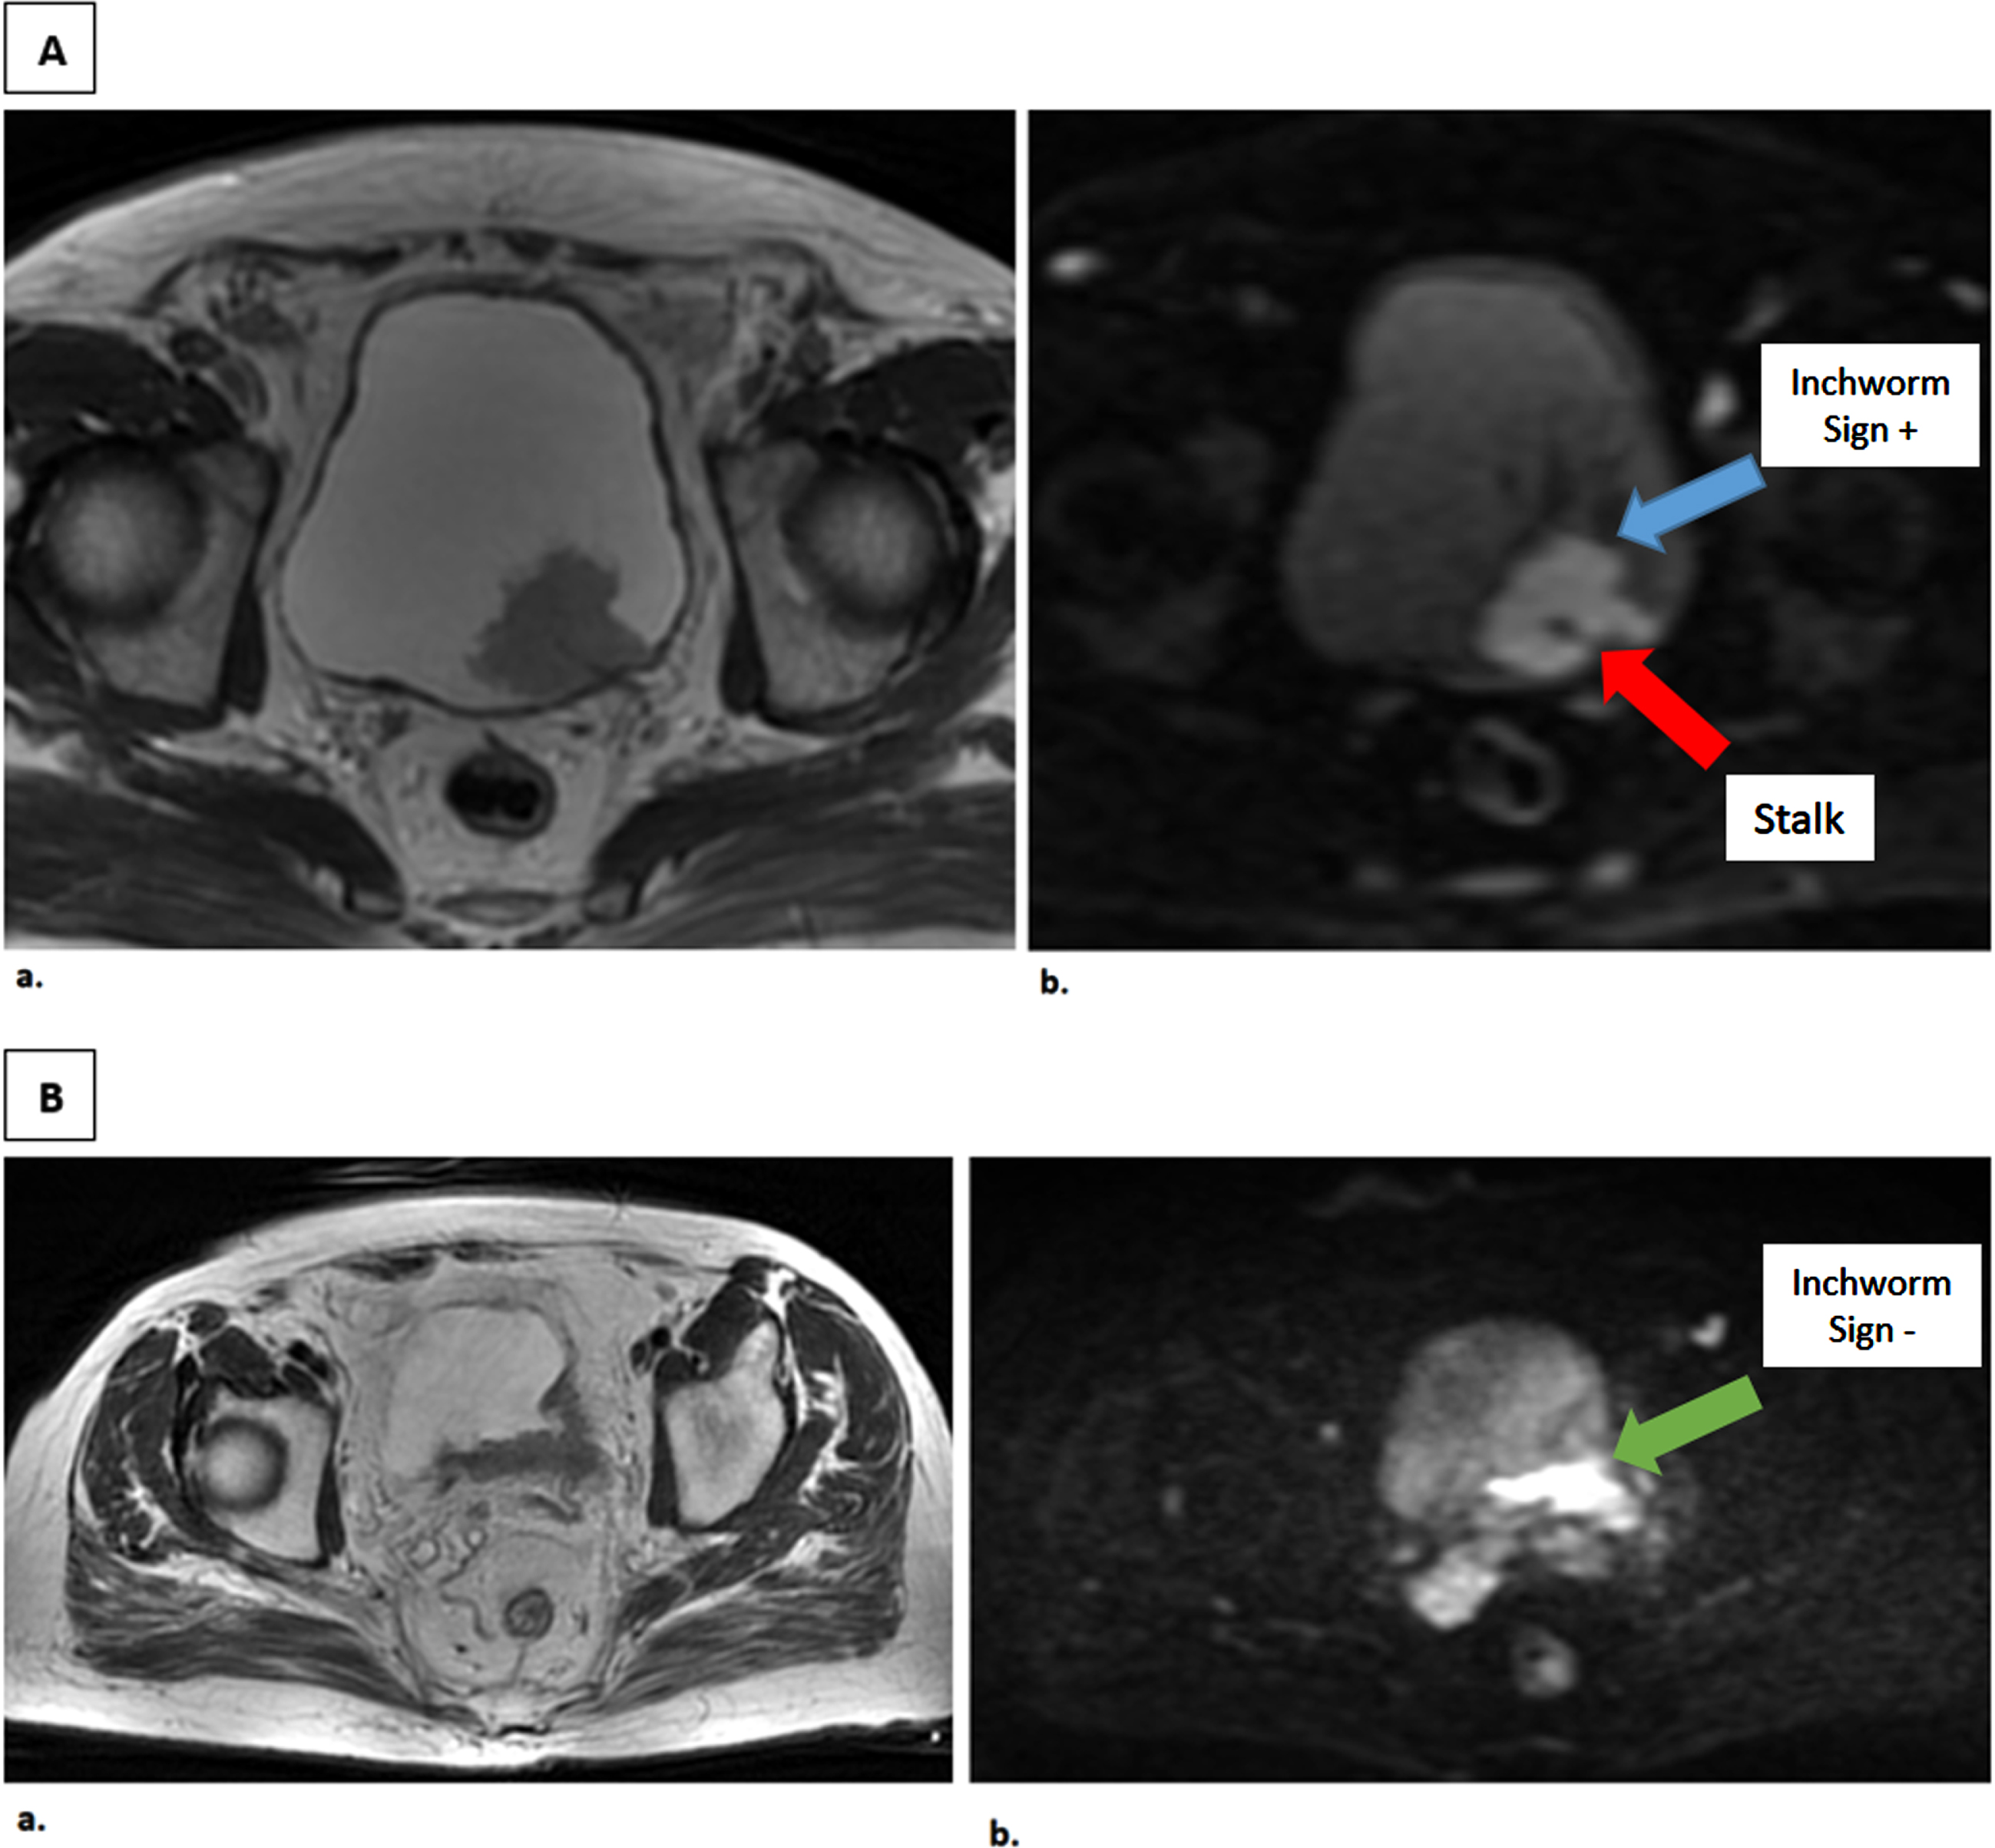 T2-weighted and Diffusion-weighted Images of patients with and without Inchworm sign. A. Axial MR images of a male patient with a 3 cm tumor on the posterior bladder wall. a. T2-weighted image b. Diffusion-weighted image tumor with high SI area with a low SI stalk, as an inchworm sign. TUR-BT revealed pT1 high grade papillary urothelial carcinoma without muscle invasion. B. Axial MR images of a male patient with 4.1 cm tumor on the posterior bladder wall. a. T2- weighted image b. Diffusion-weighted image tumor without inchworm sign. TUR-BT revealed T2 high grade papillary urothelial carcinoma and Radical cystectomy was performed, pathology resulted as pT3 high grade.